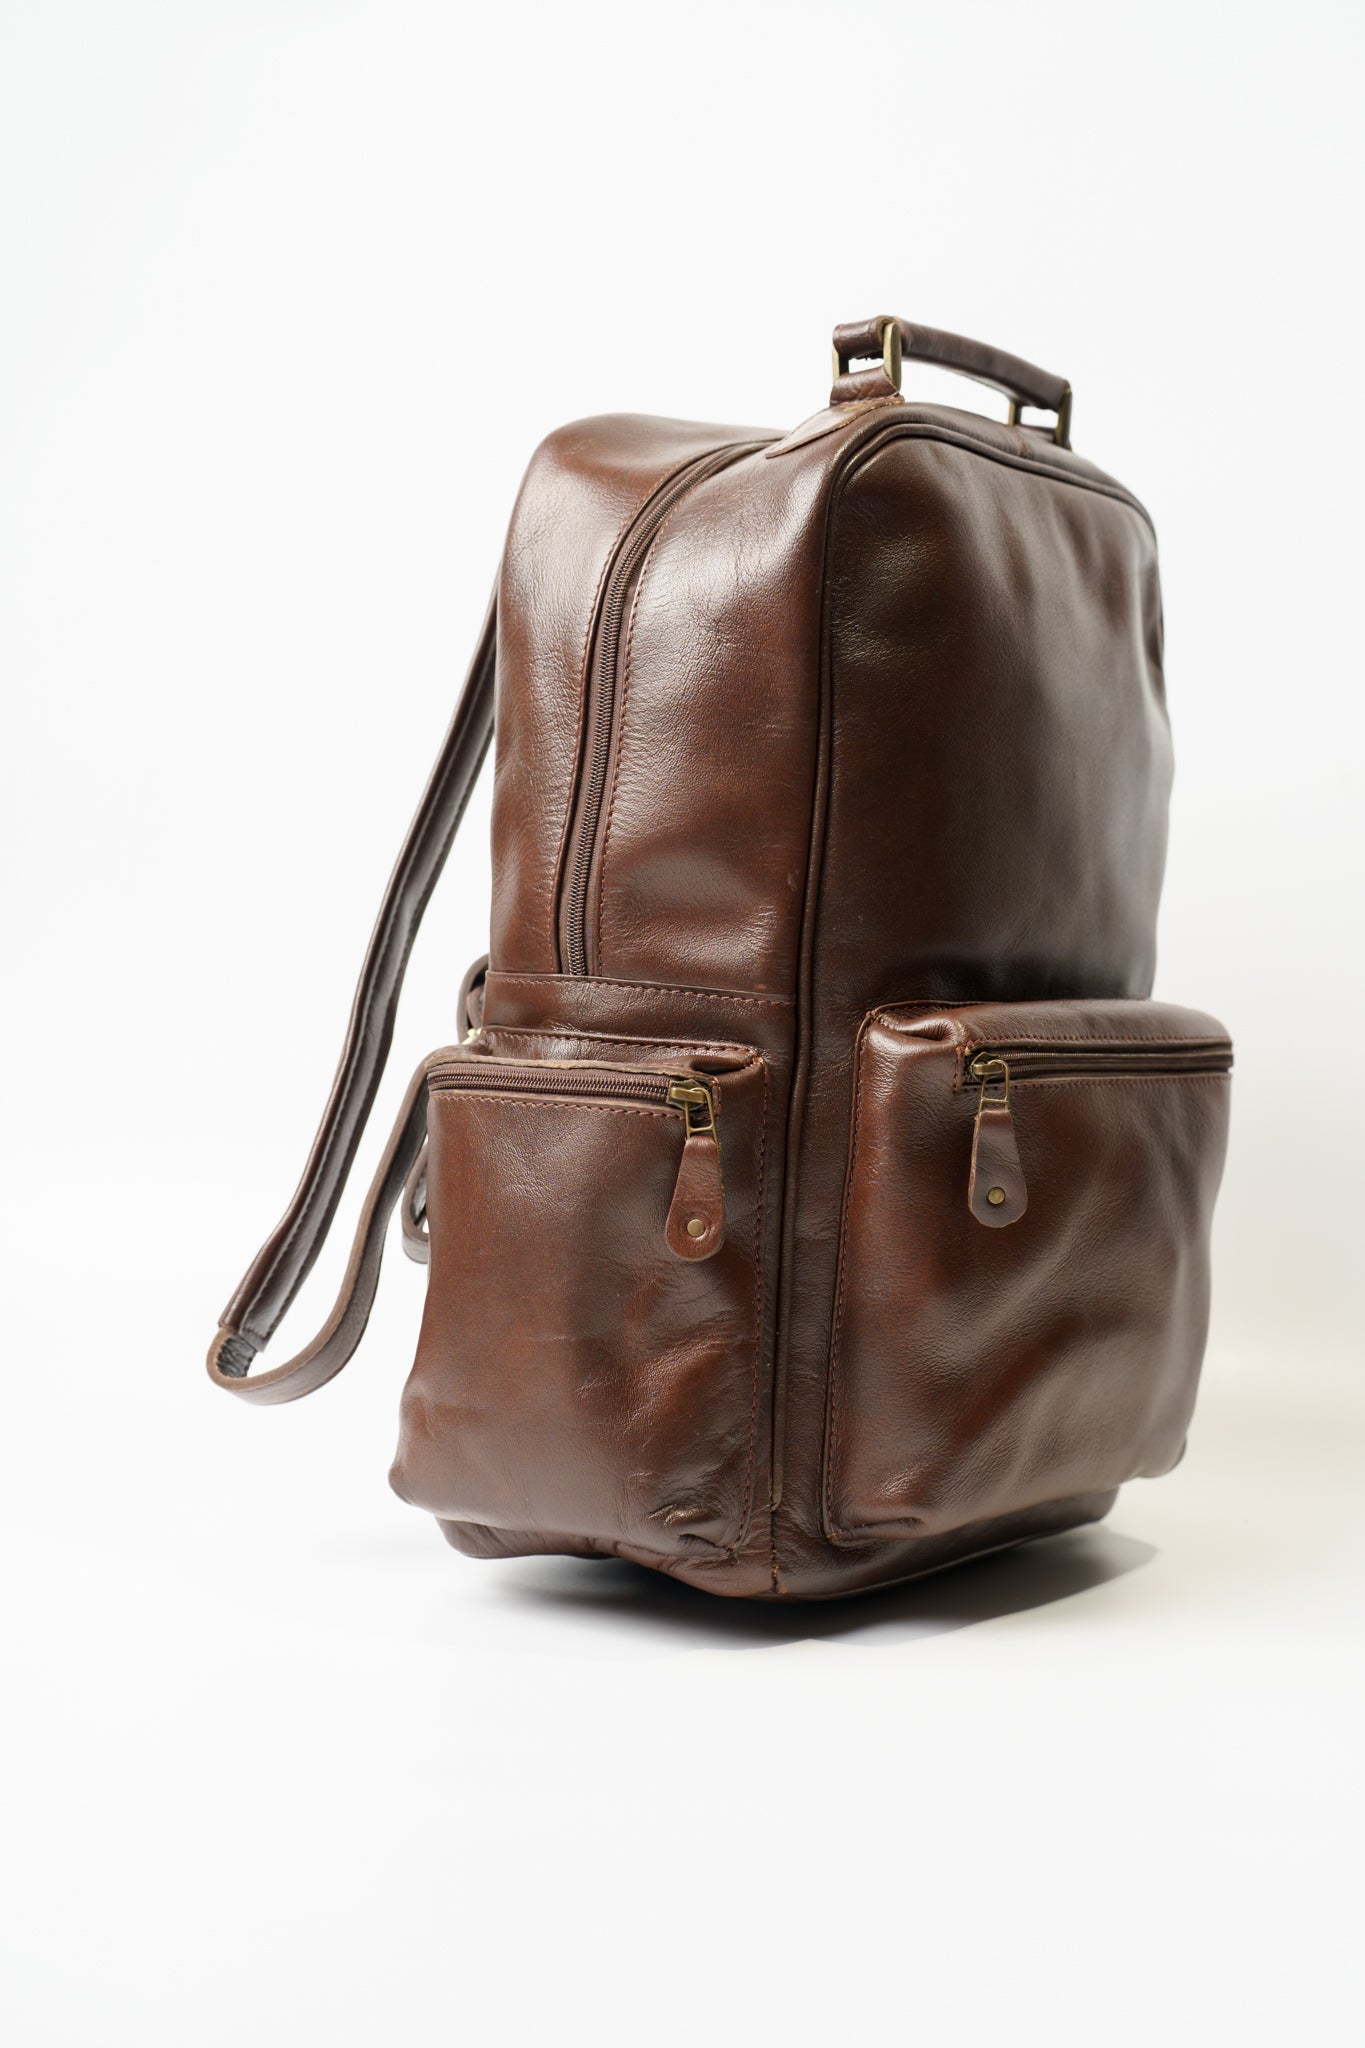 Side view of Chamra's brown leather backpack showcasing three distinct pockets, two on the sides and one on the front, each with zipper closure.